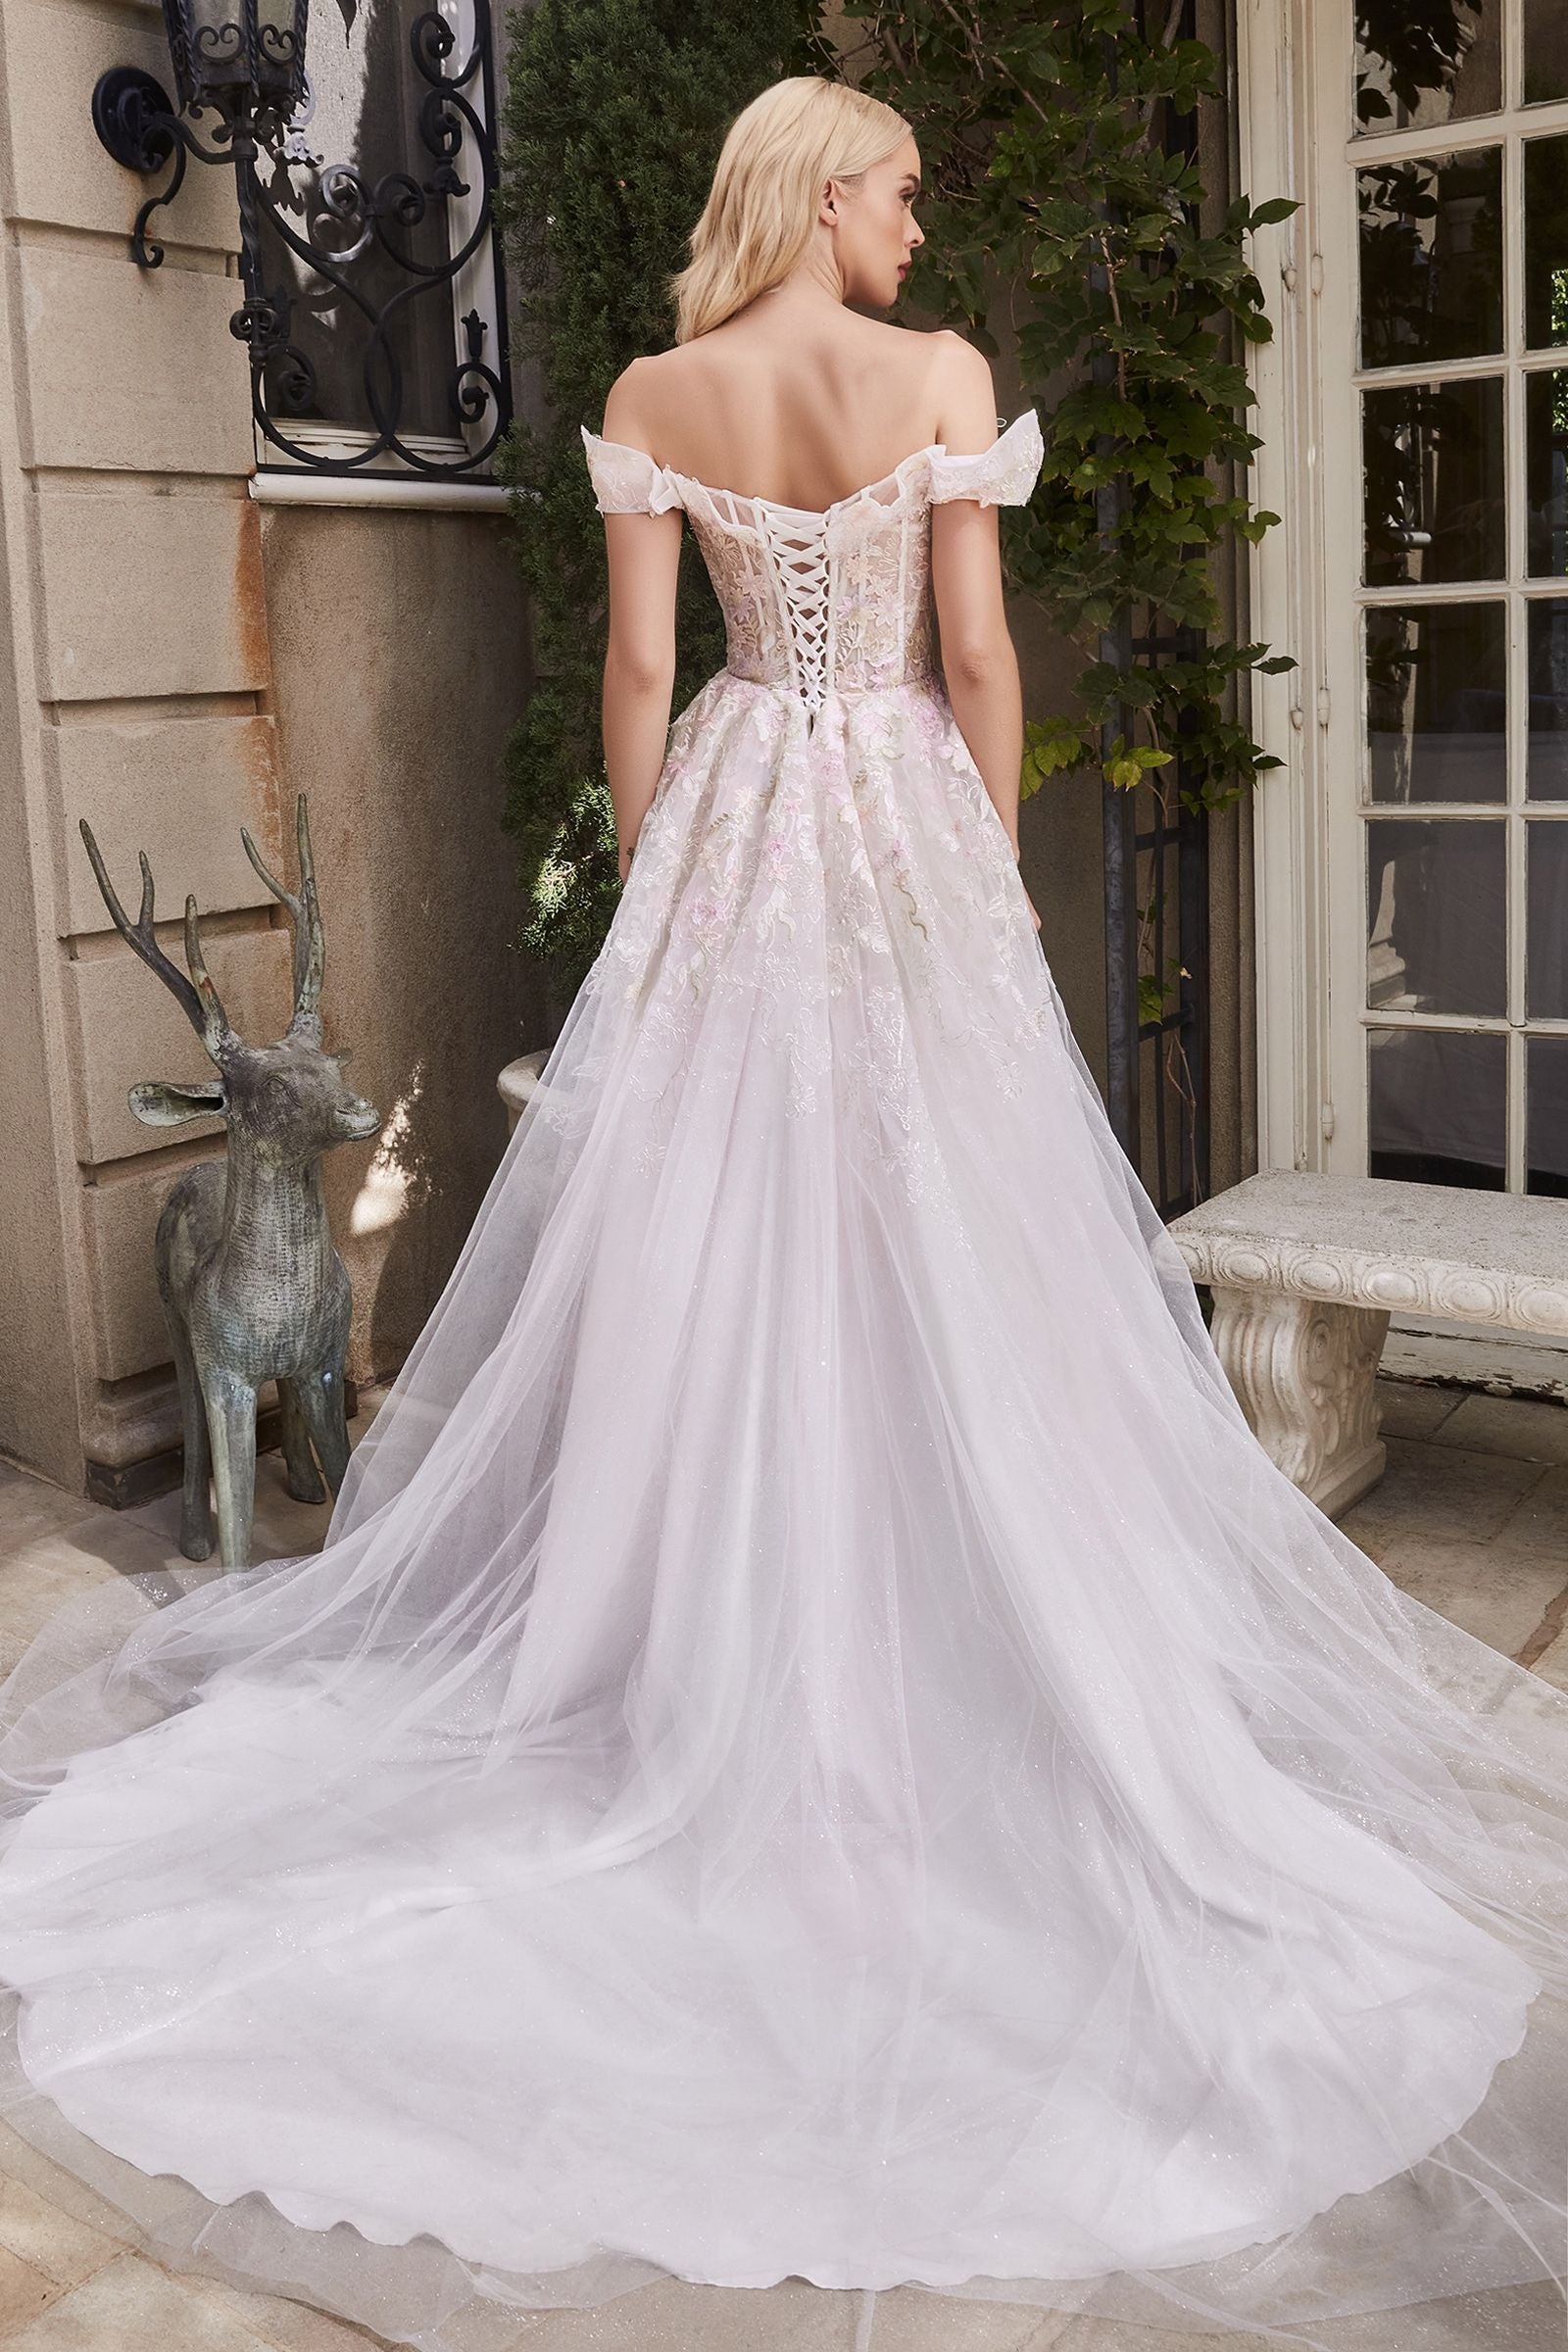 chic wedding dress with corset and fitted silhouette